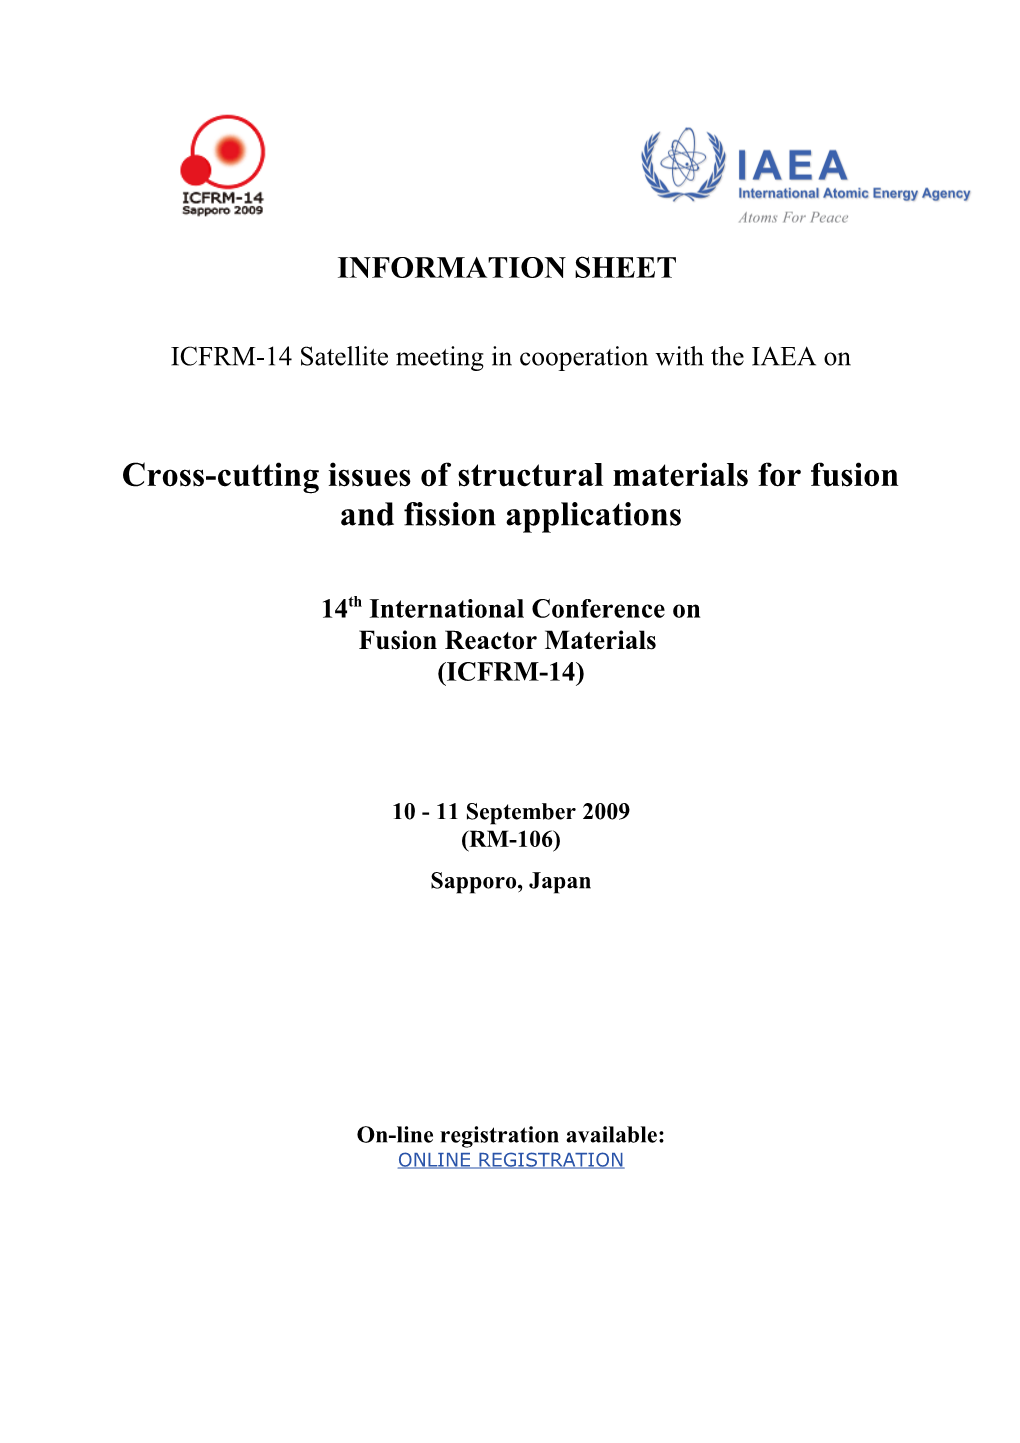 ICFRM-14 Satellite Meeting in Cooperation with the IAEA On